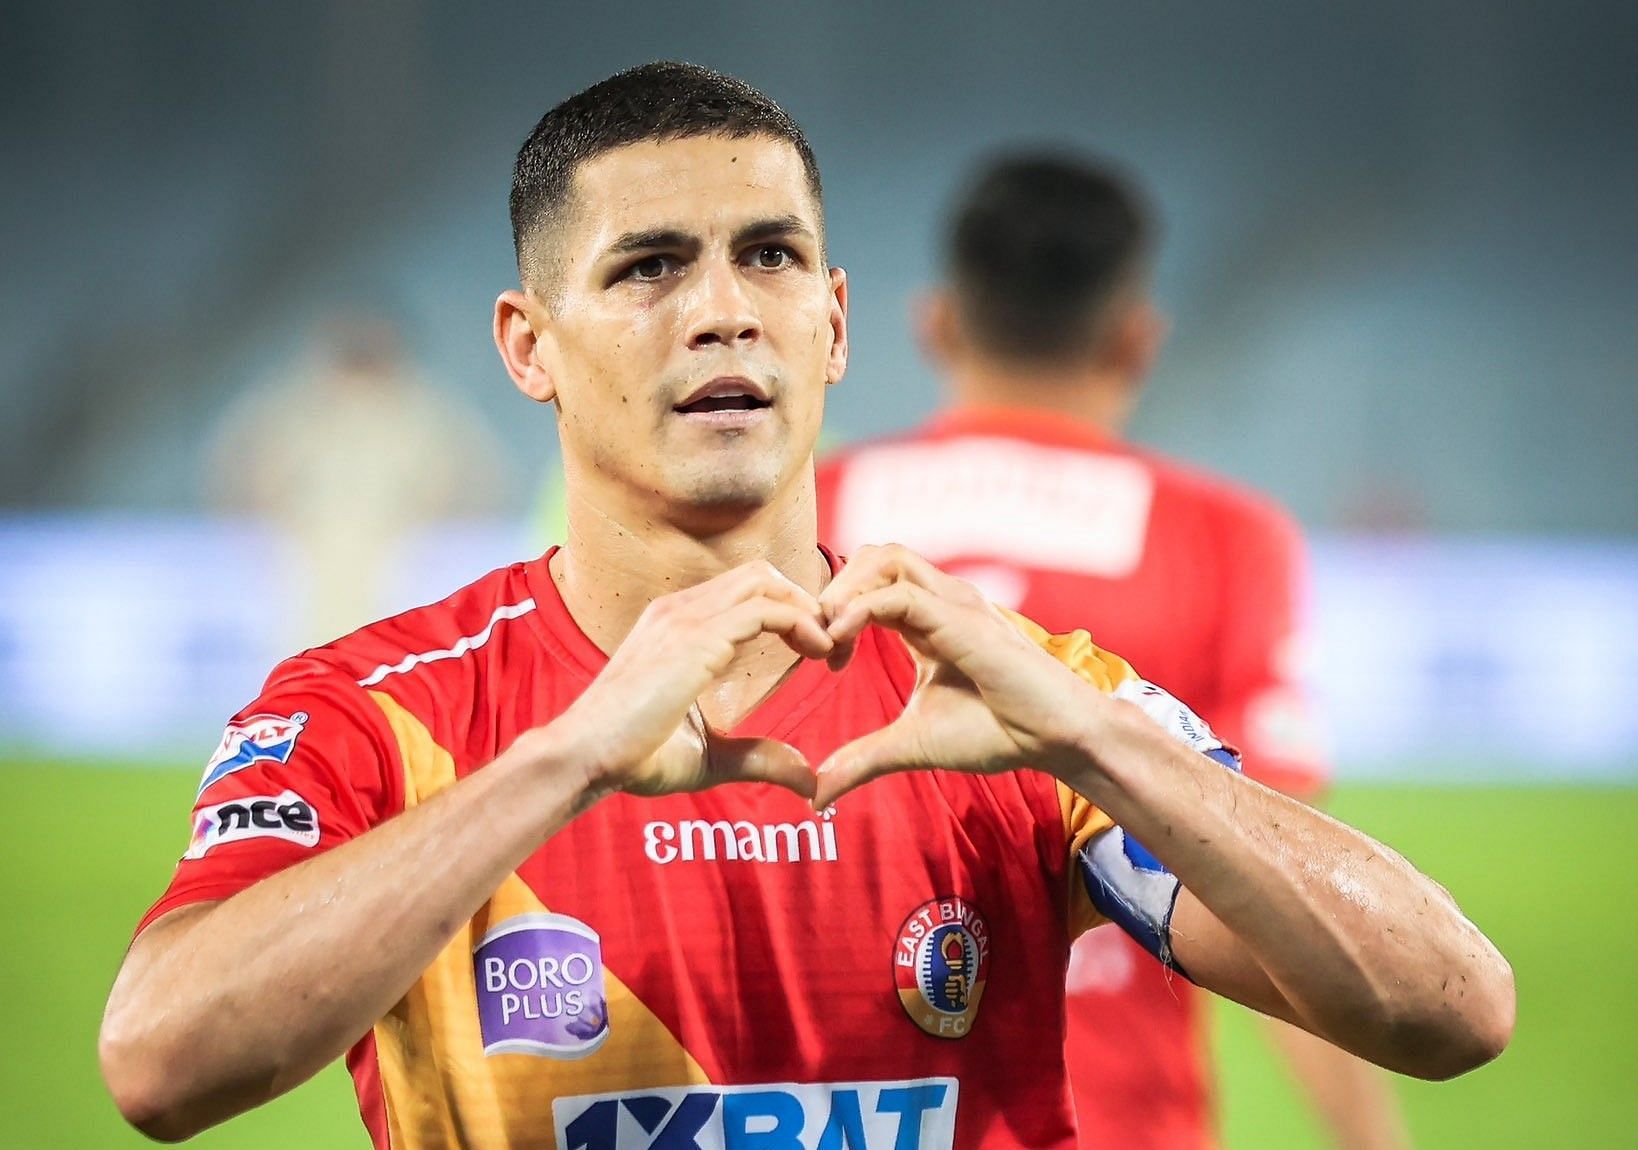 Cleiton Silva celebrating after his goal against Kerala Blasters FC.